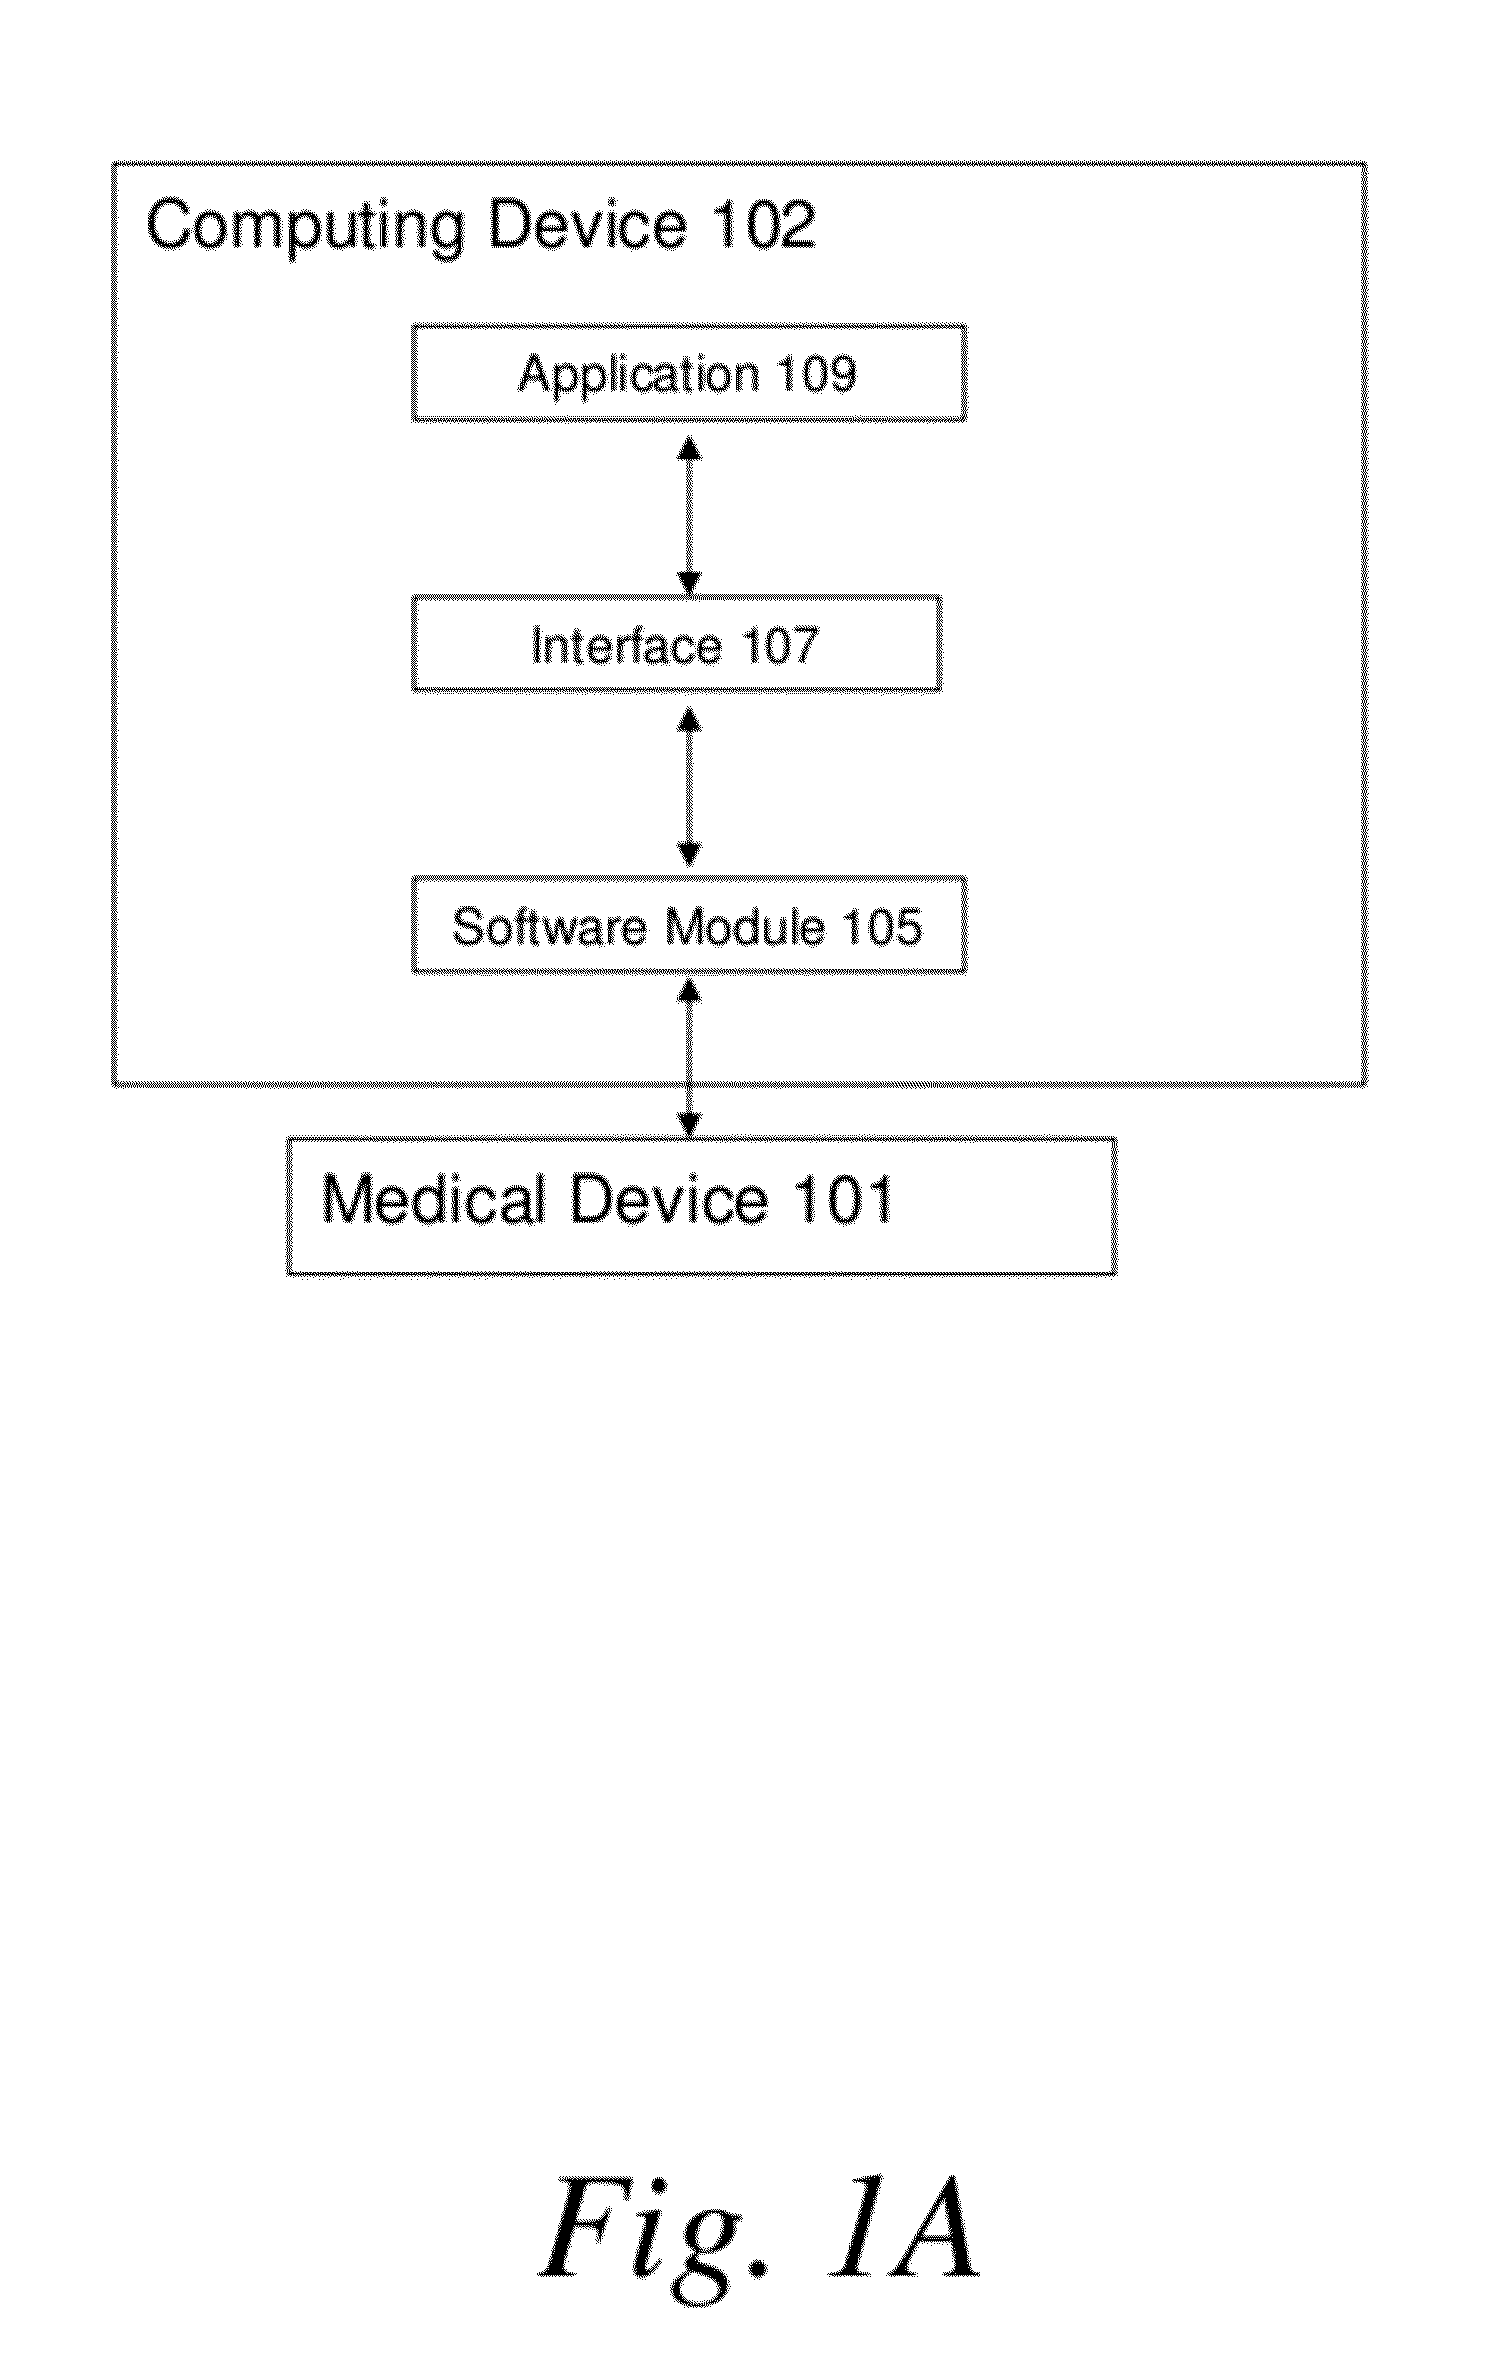 Methods and Systems for Enabling Applications on a Mobile Computing Device to Access Data Associated with a Peripheral Medical Device